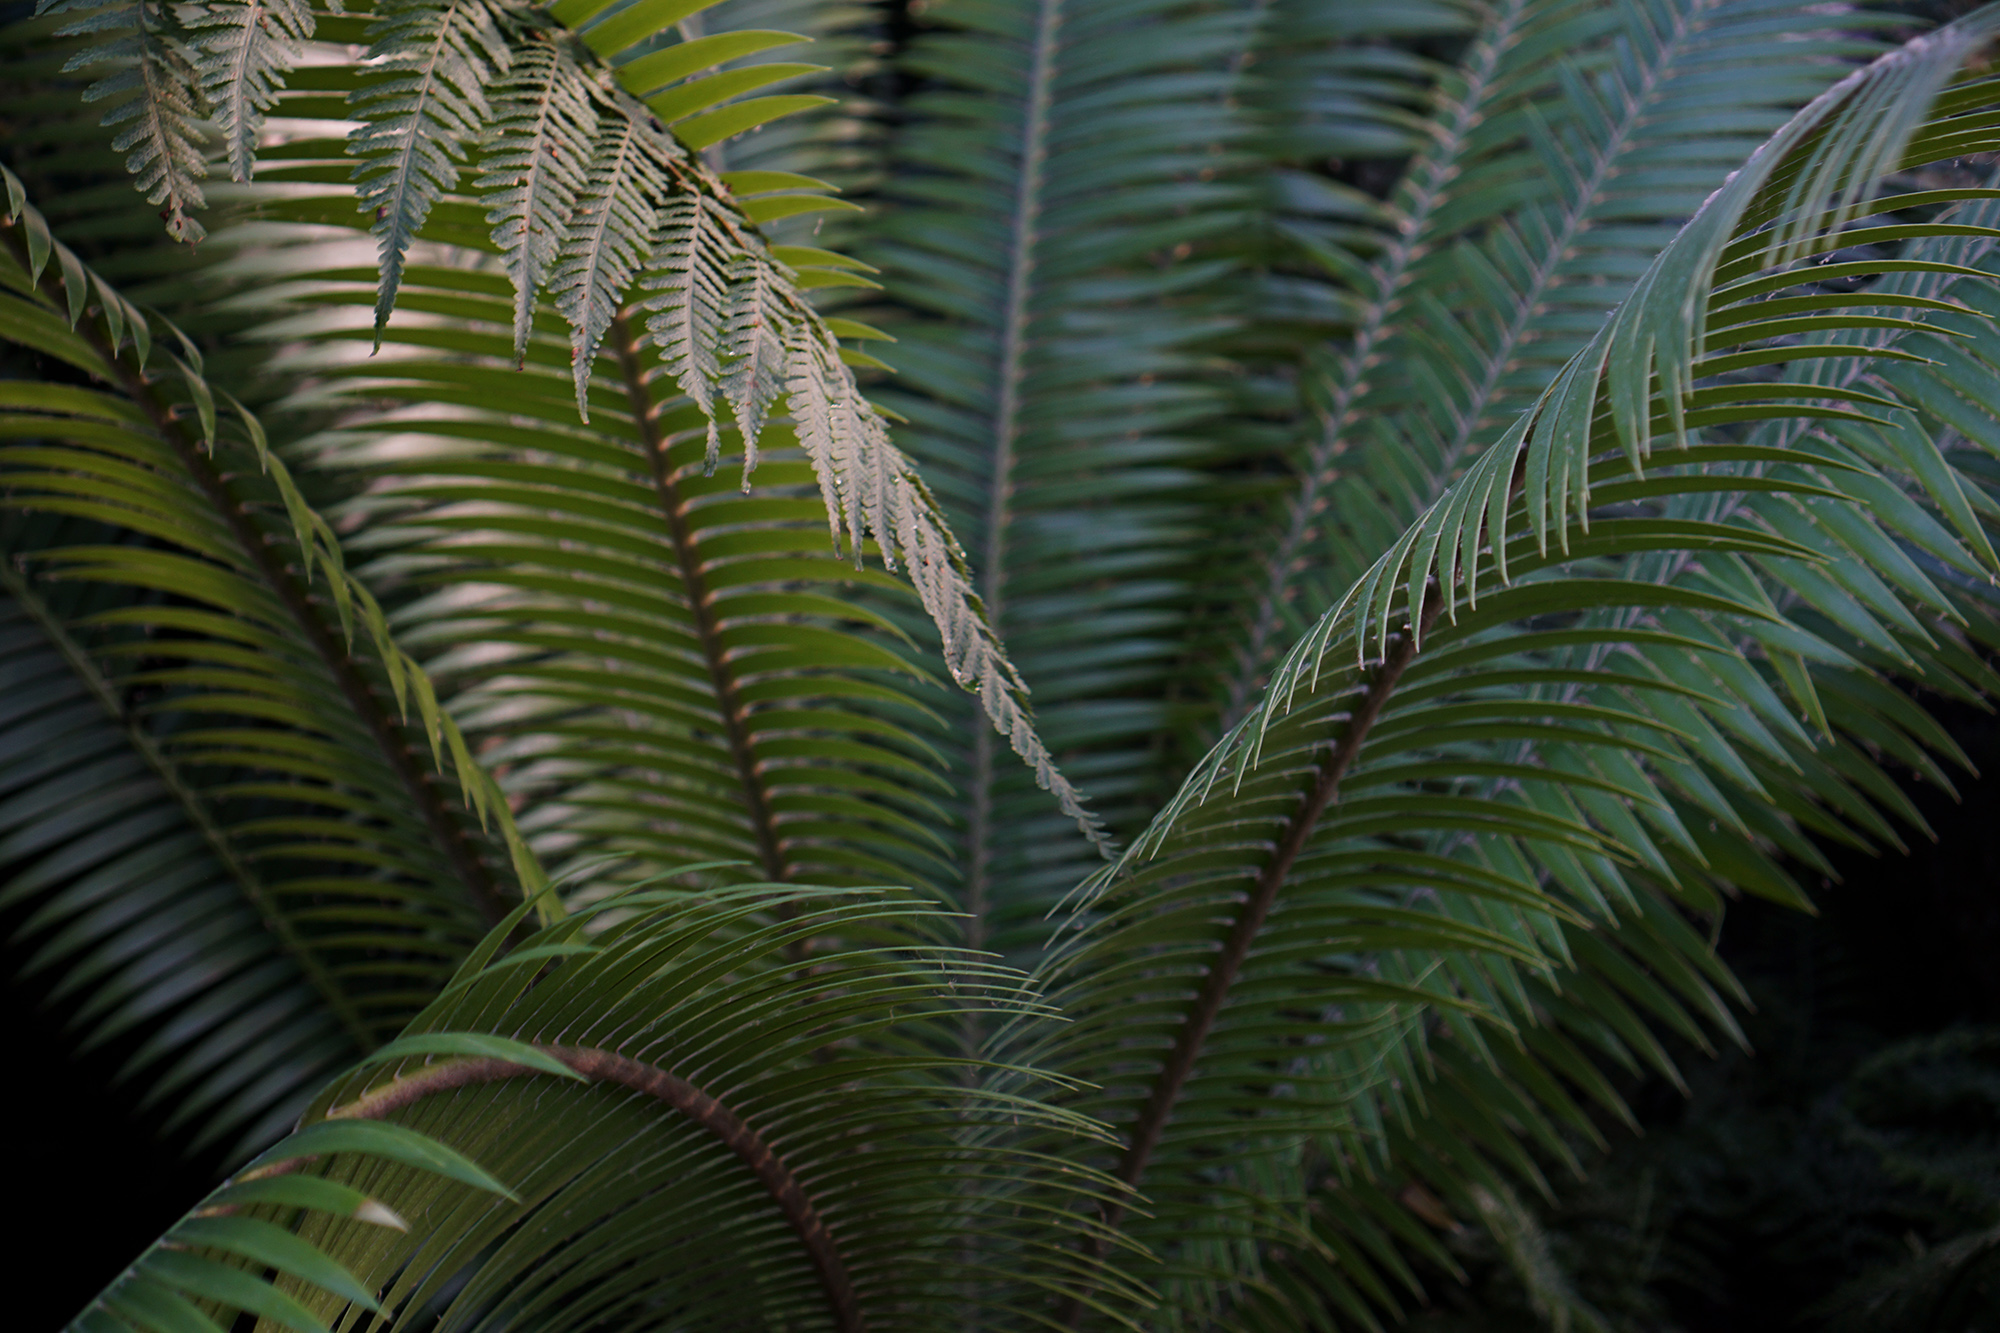 Ferns in the Lincoln Park Conservatory, Chicago / Darker than Green